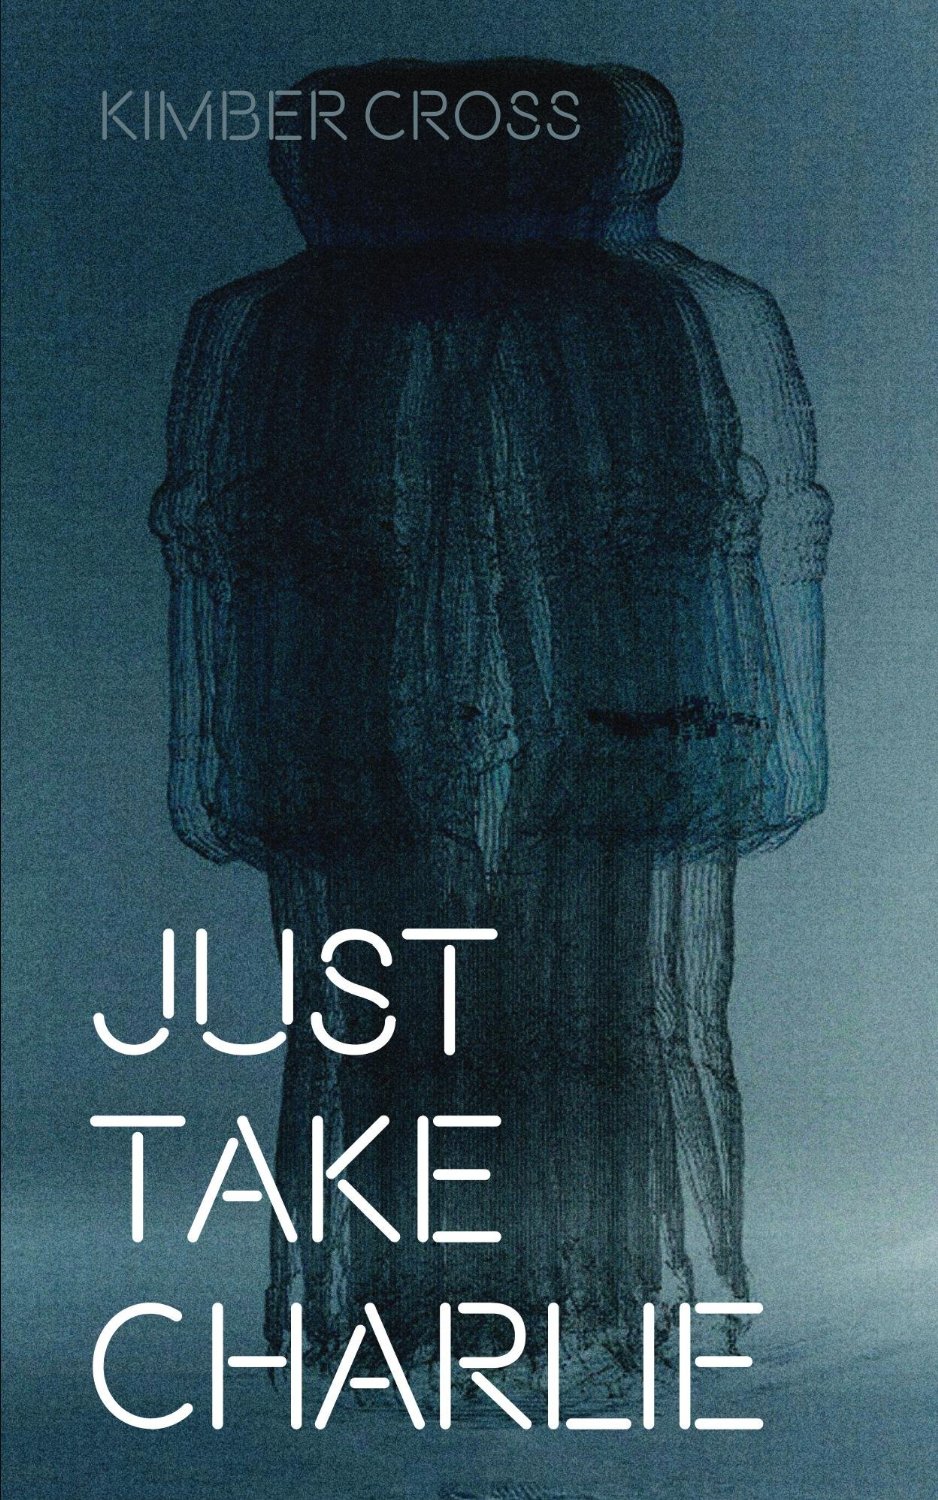 Just Take Charlie by Kimber Cross